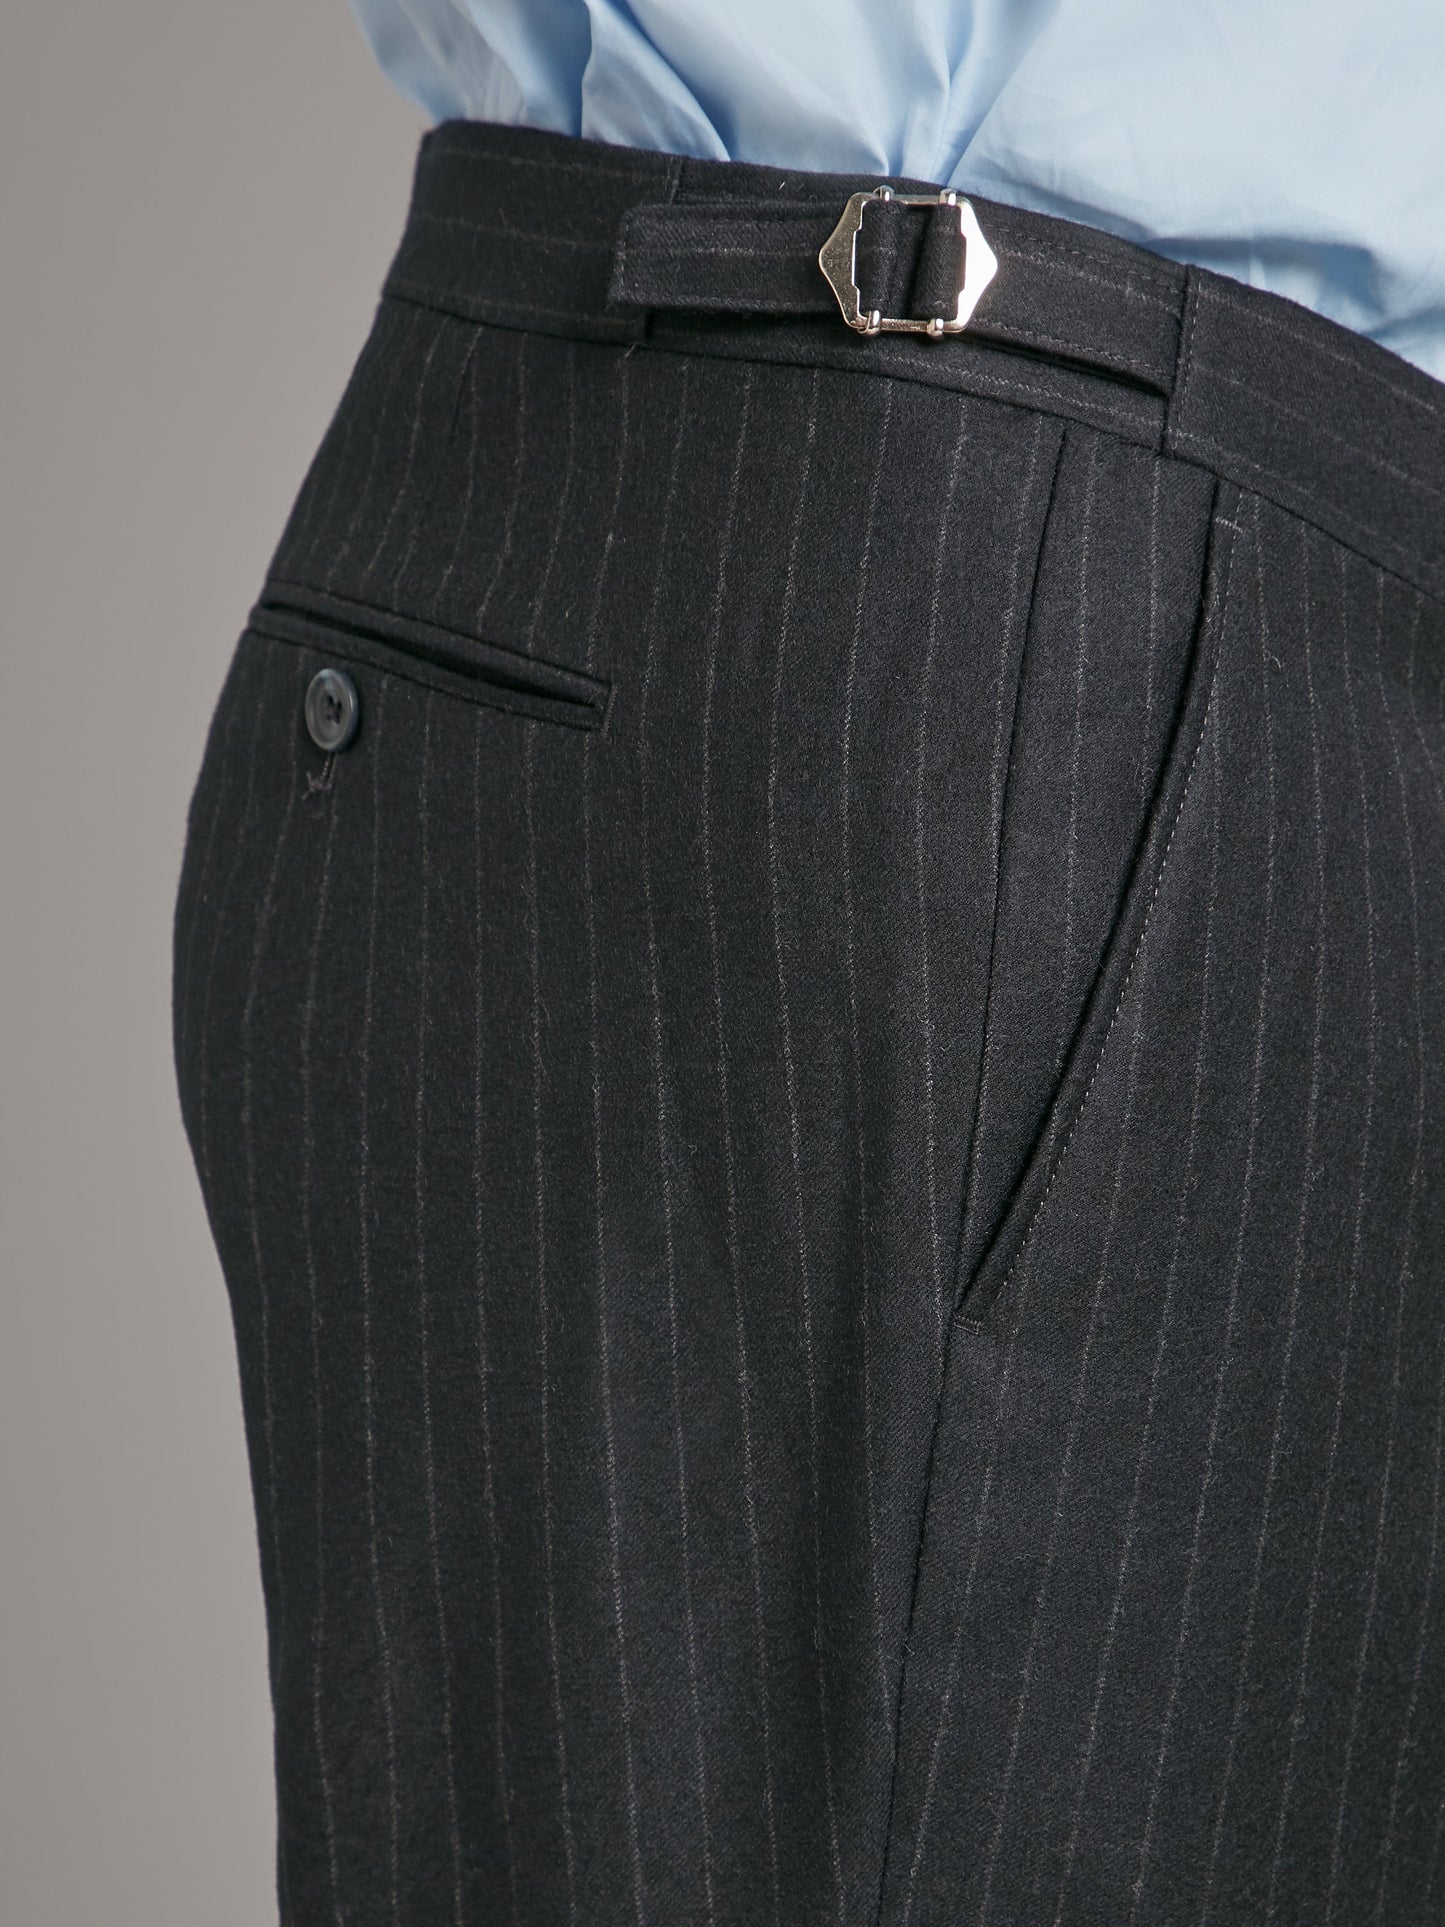 carlyle suit chalk stripe flannel navy 8